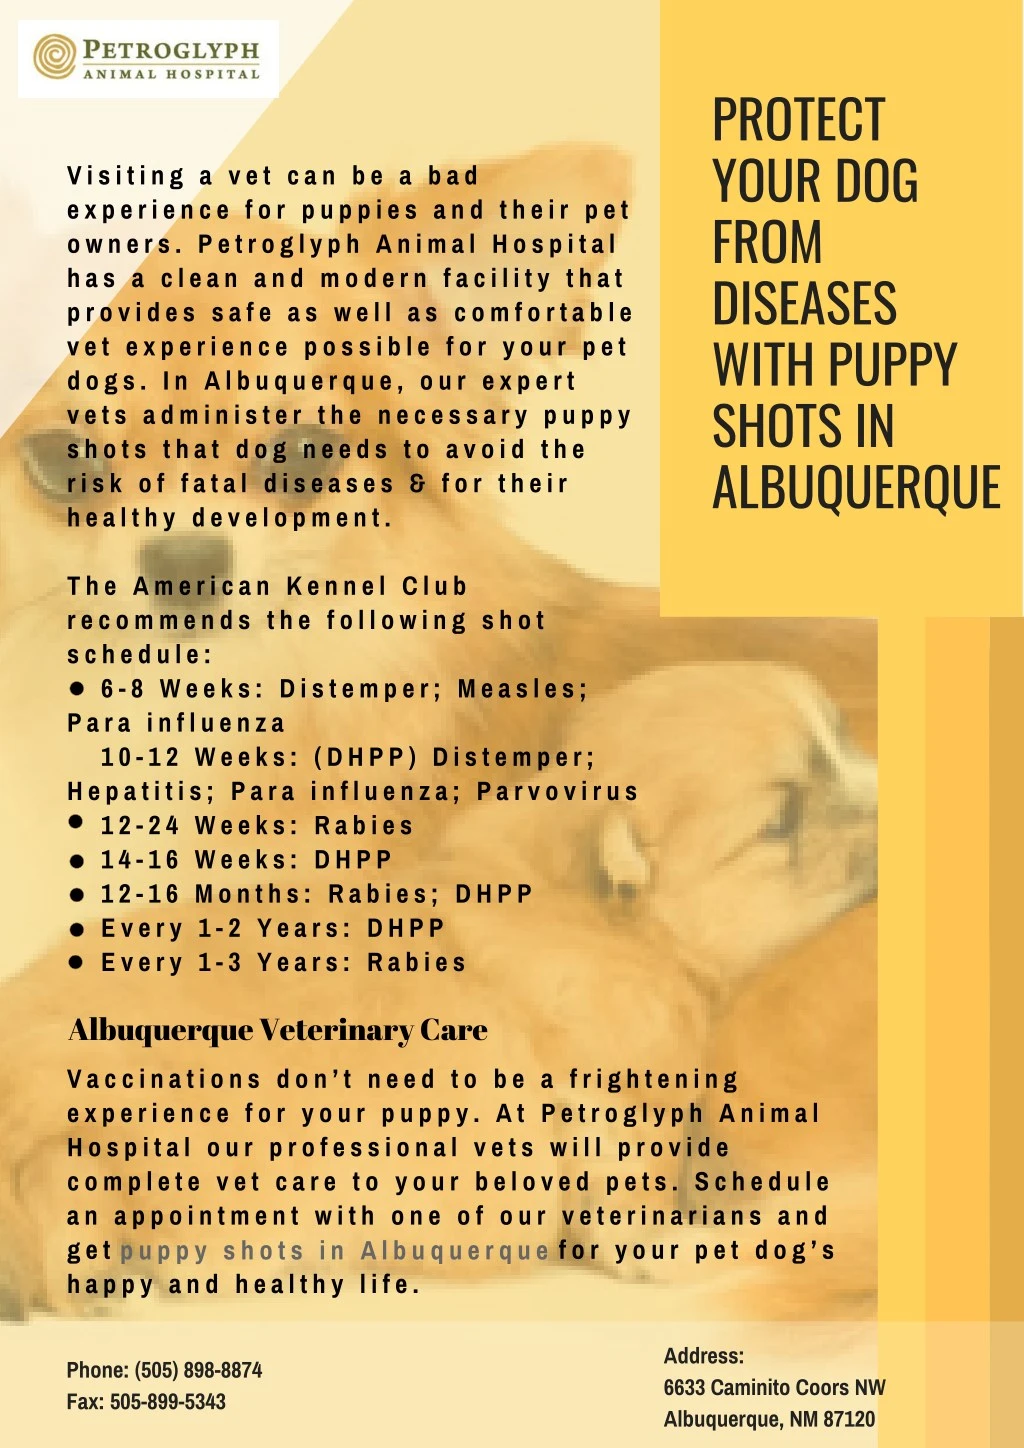 protect your dog from diseases with puppy shots